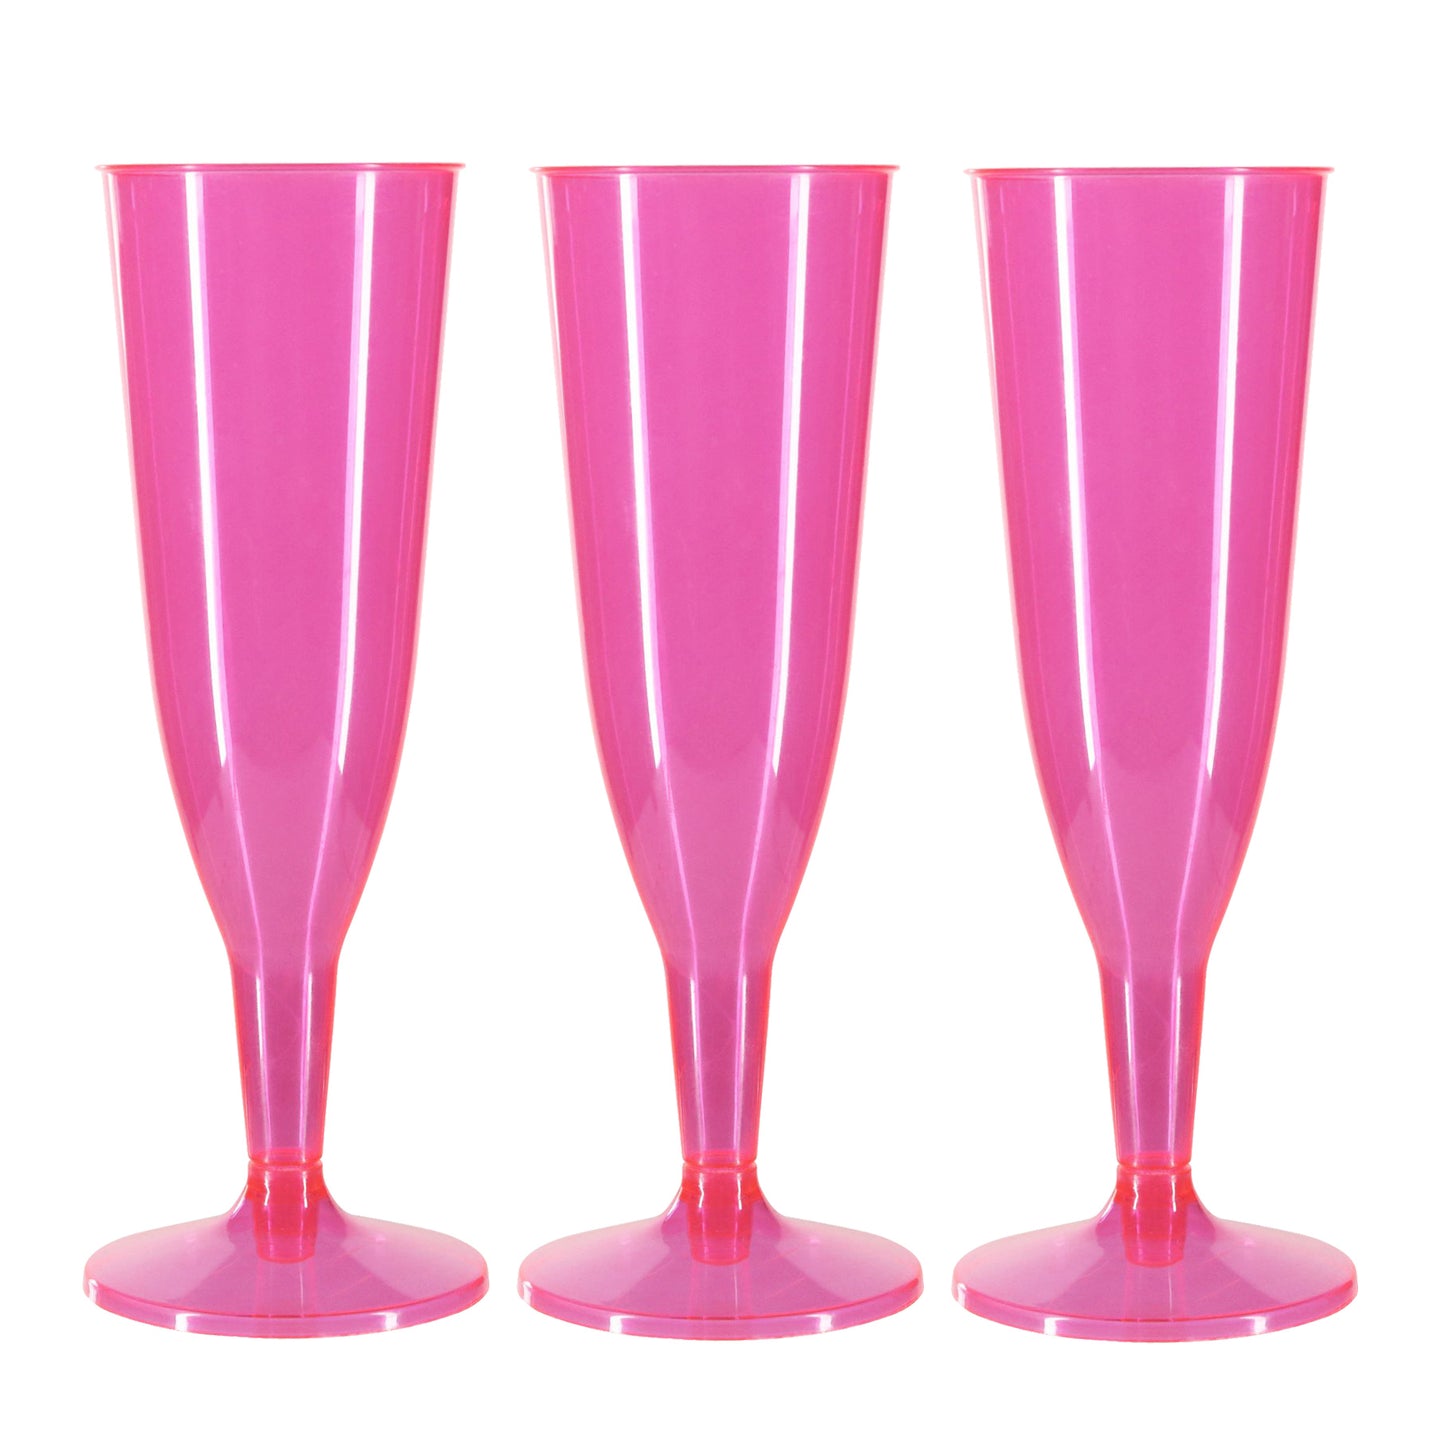 6 x Pink Prosecco Flutes 175ml 6oz Capacity Recyclable Polystyrene Material Transparent 2-Piece Sturdy Champagne Glasses BBQs Picnics-5056020183570-PCUP-CHAMP2PPINK-Product Pro-Champagne Glasses, Clear Champagne Glasses, Pink, Plastic Flutes, Prosecco Flutes